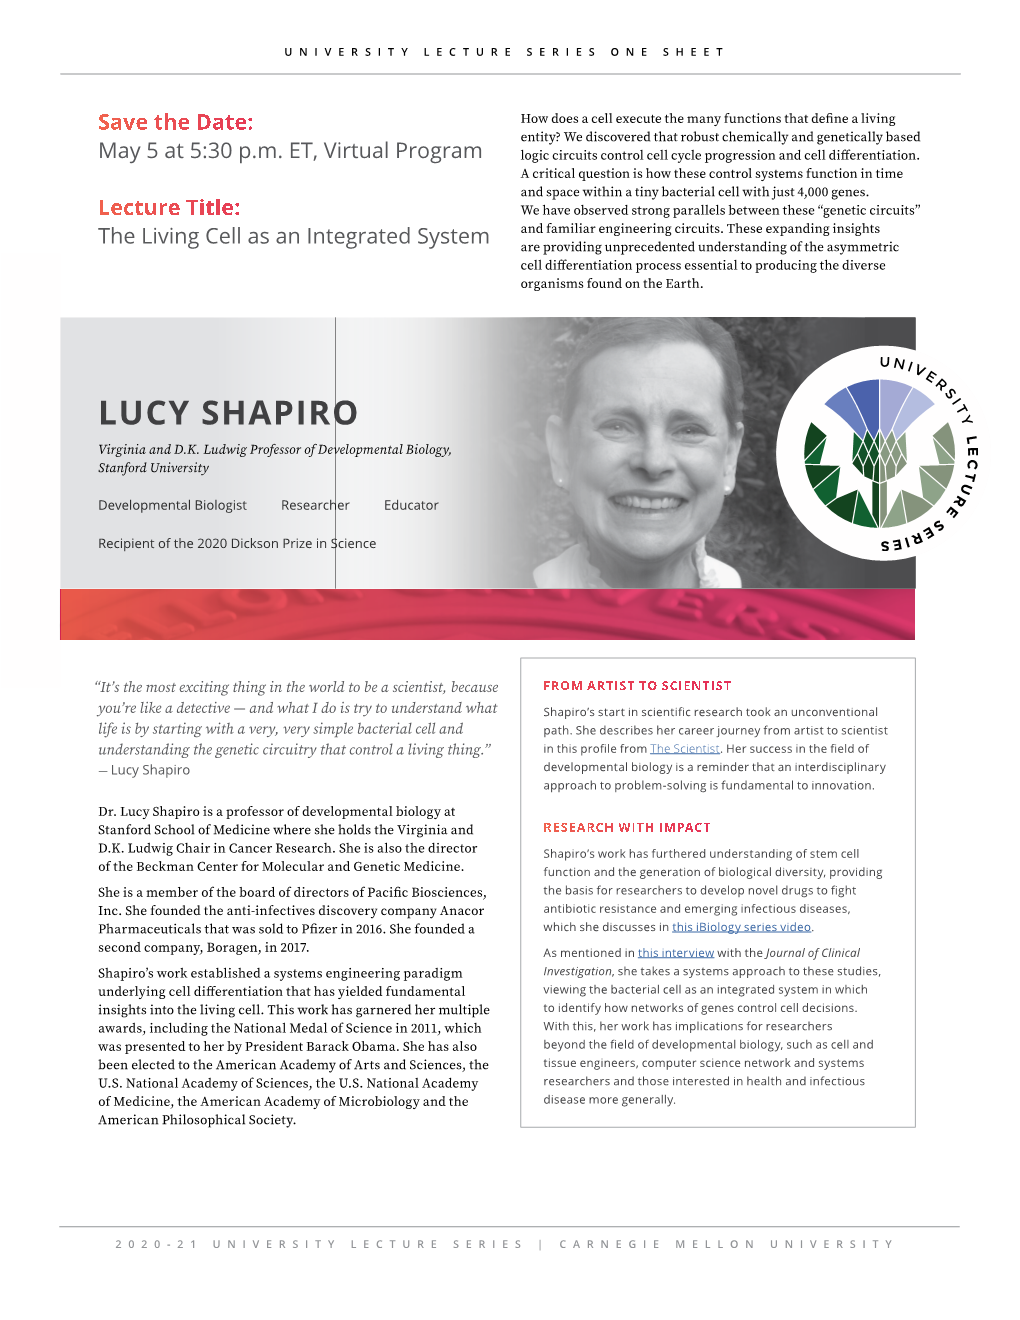 Dr. Lucy Shapiro Is a Professor of Developmental Biology at Stanford School of Medicine Where She Holds the Virginia and RESEARCH with IMPACT D.K